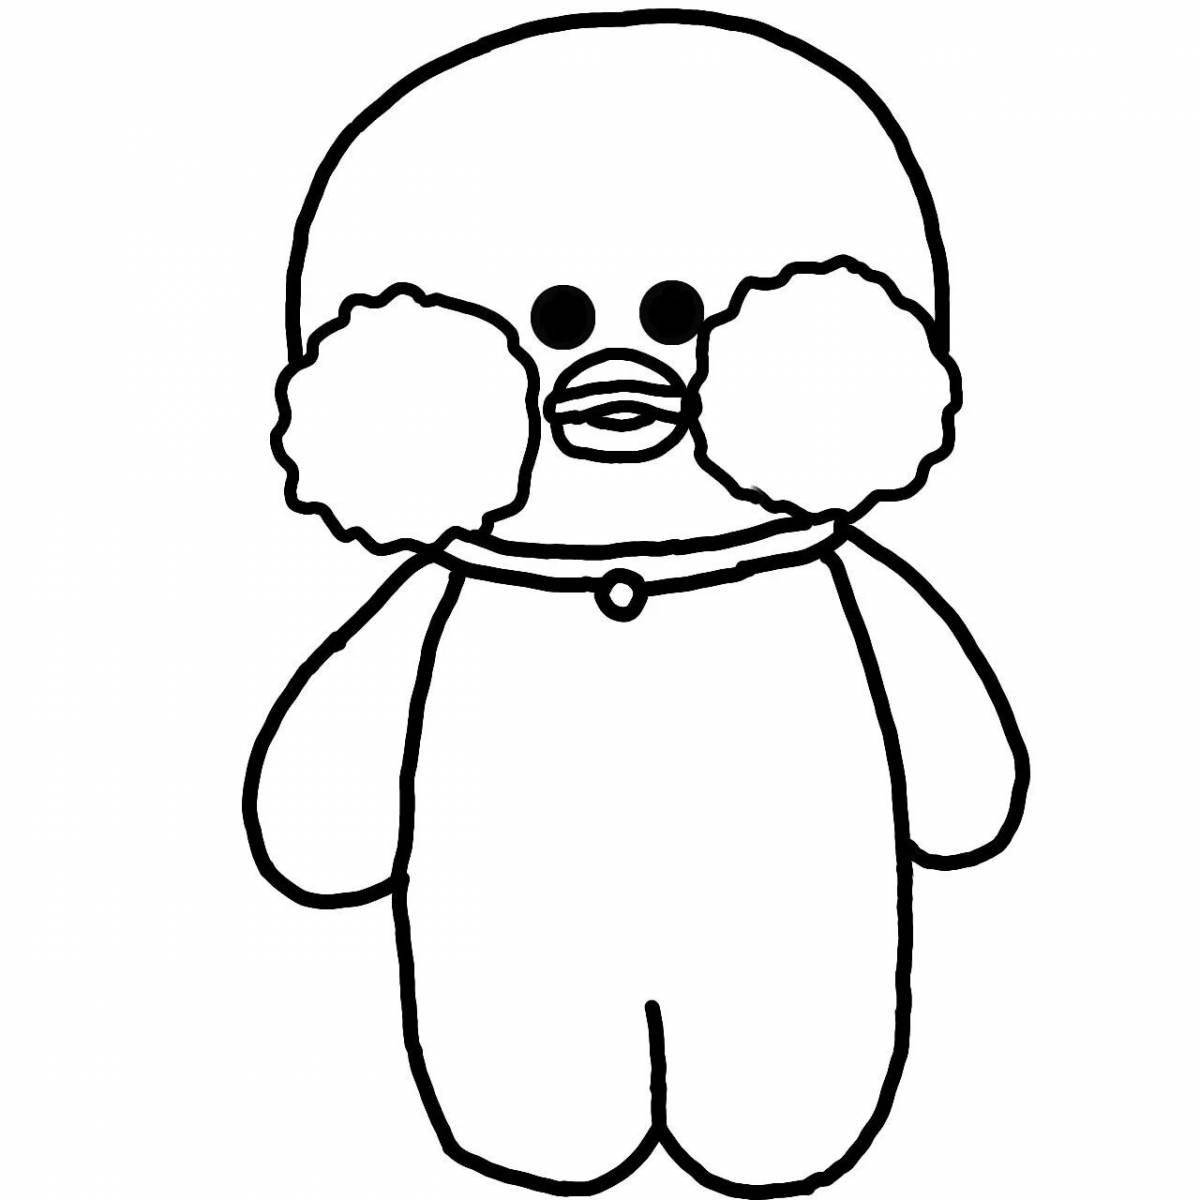 Coloring page stylish dressed duck